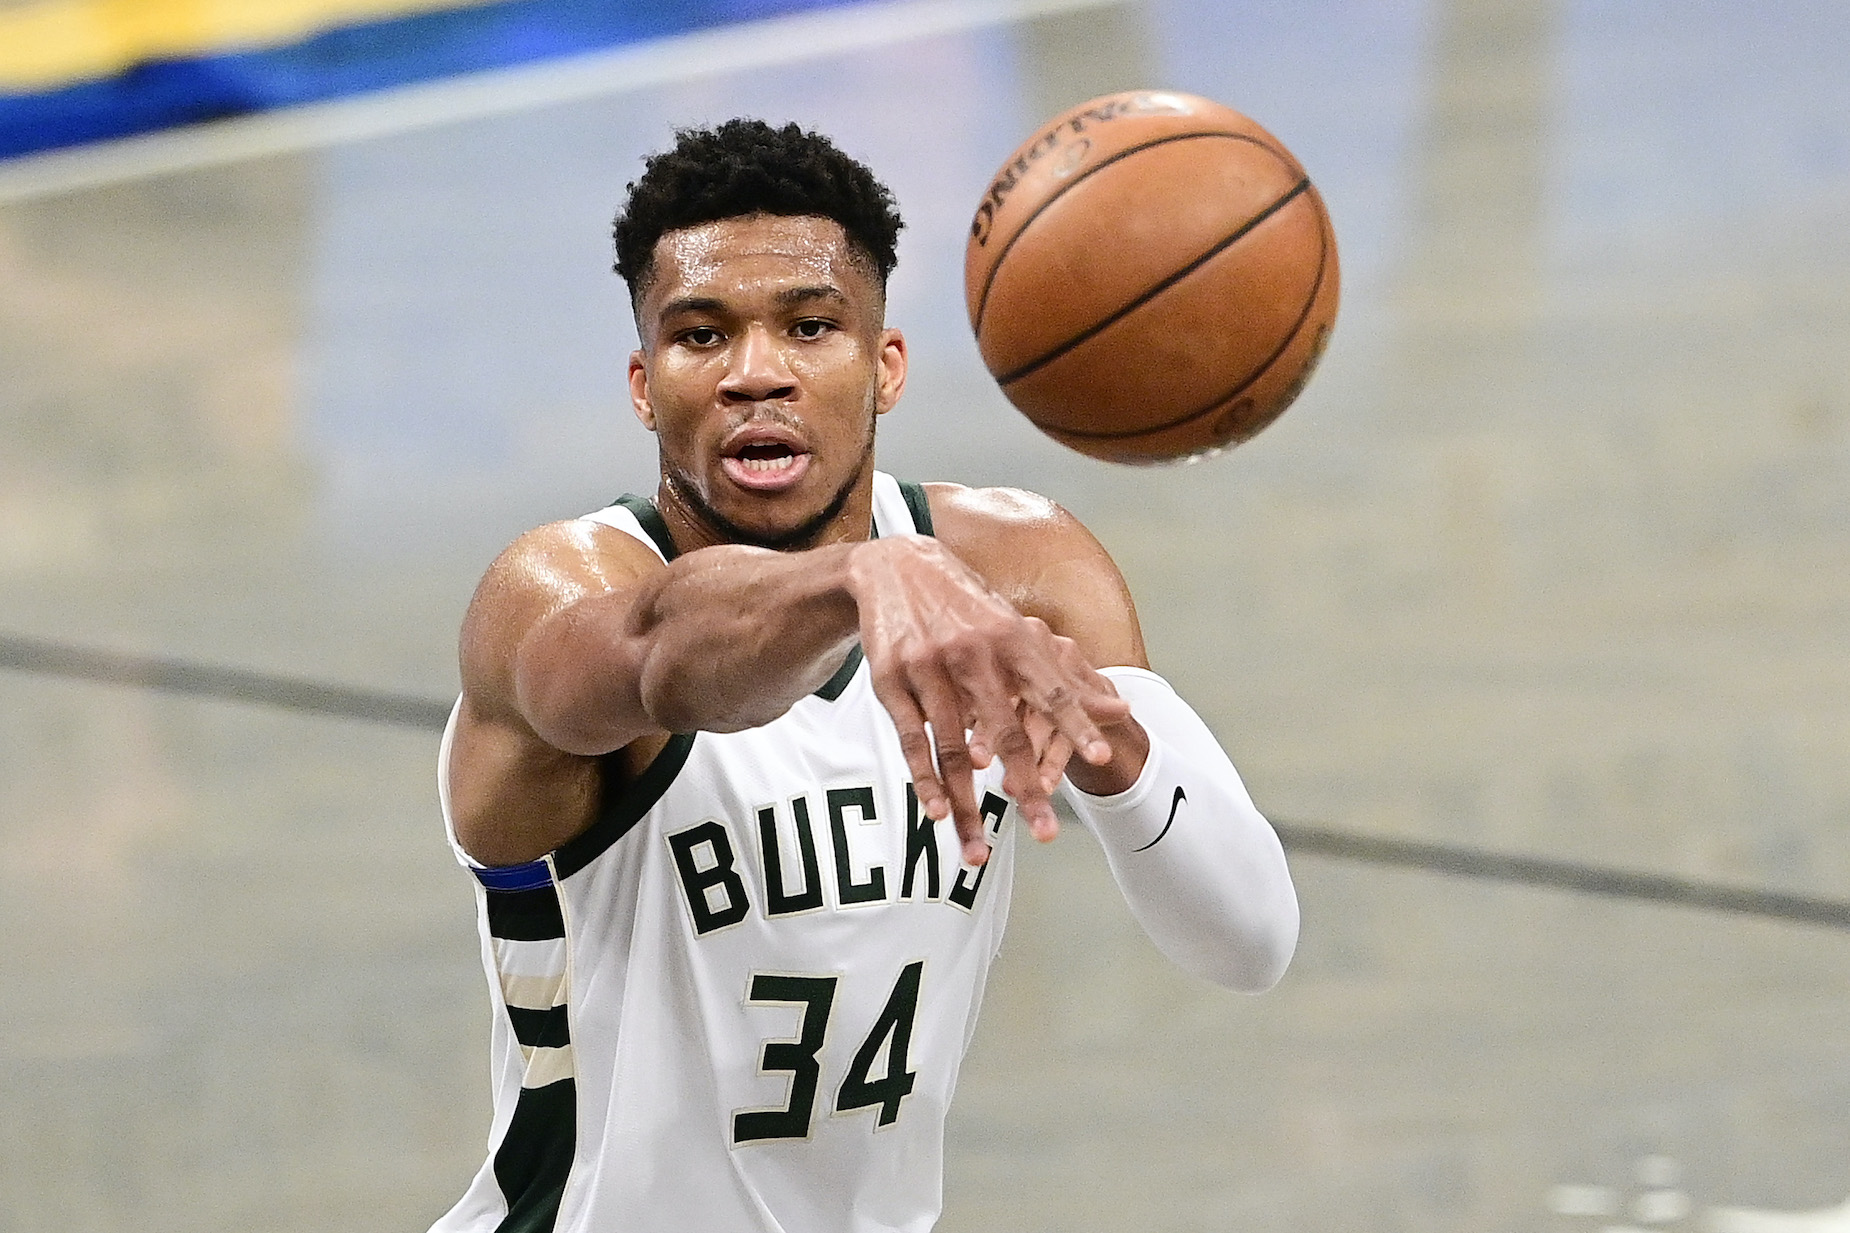 Giannis Antetokounmpo in action for the Milwaukee Bucks during a 2021 NBA playoff game against the Brooklyn Nets.